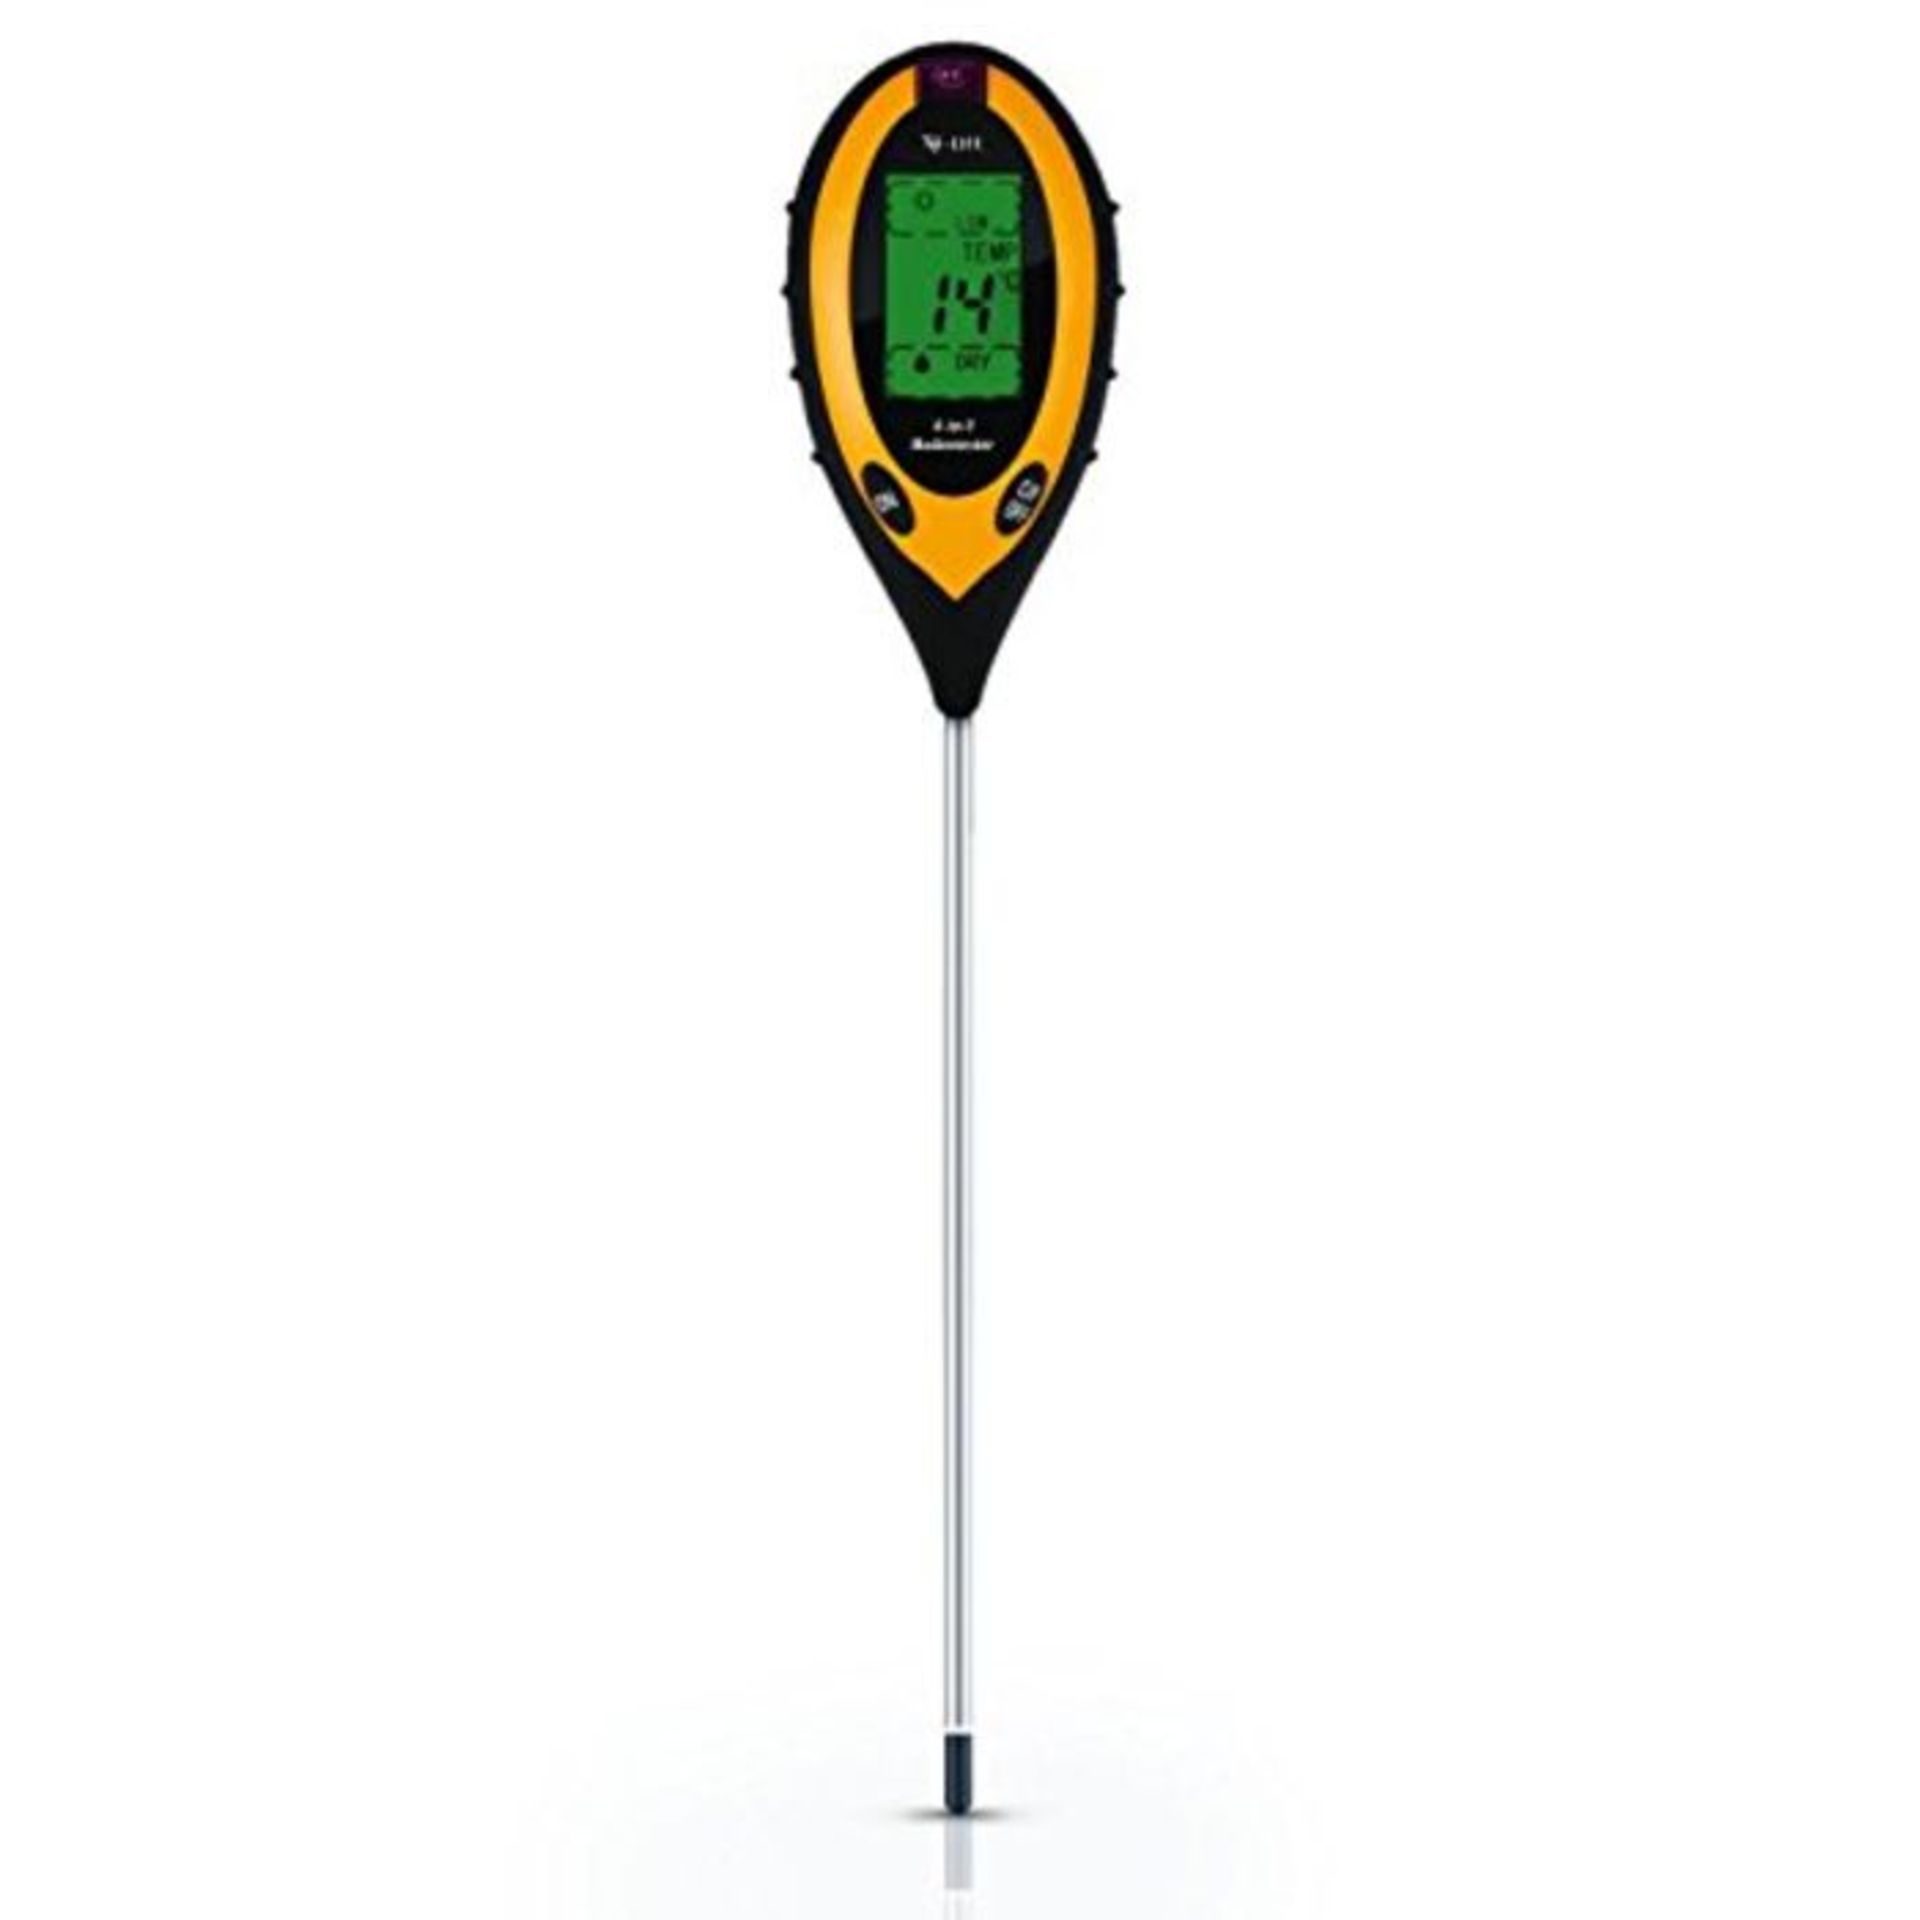 X4-LIFE 700403 4-in-1 Ground Tester Digital Ground Measuring Device